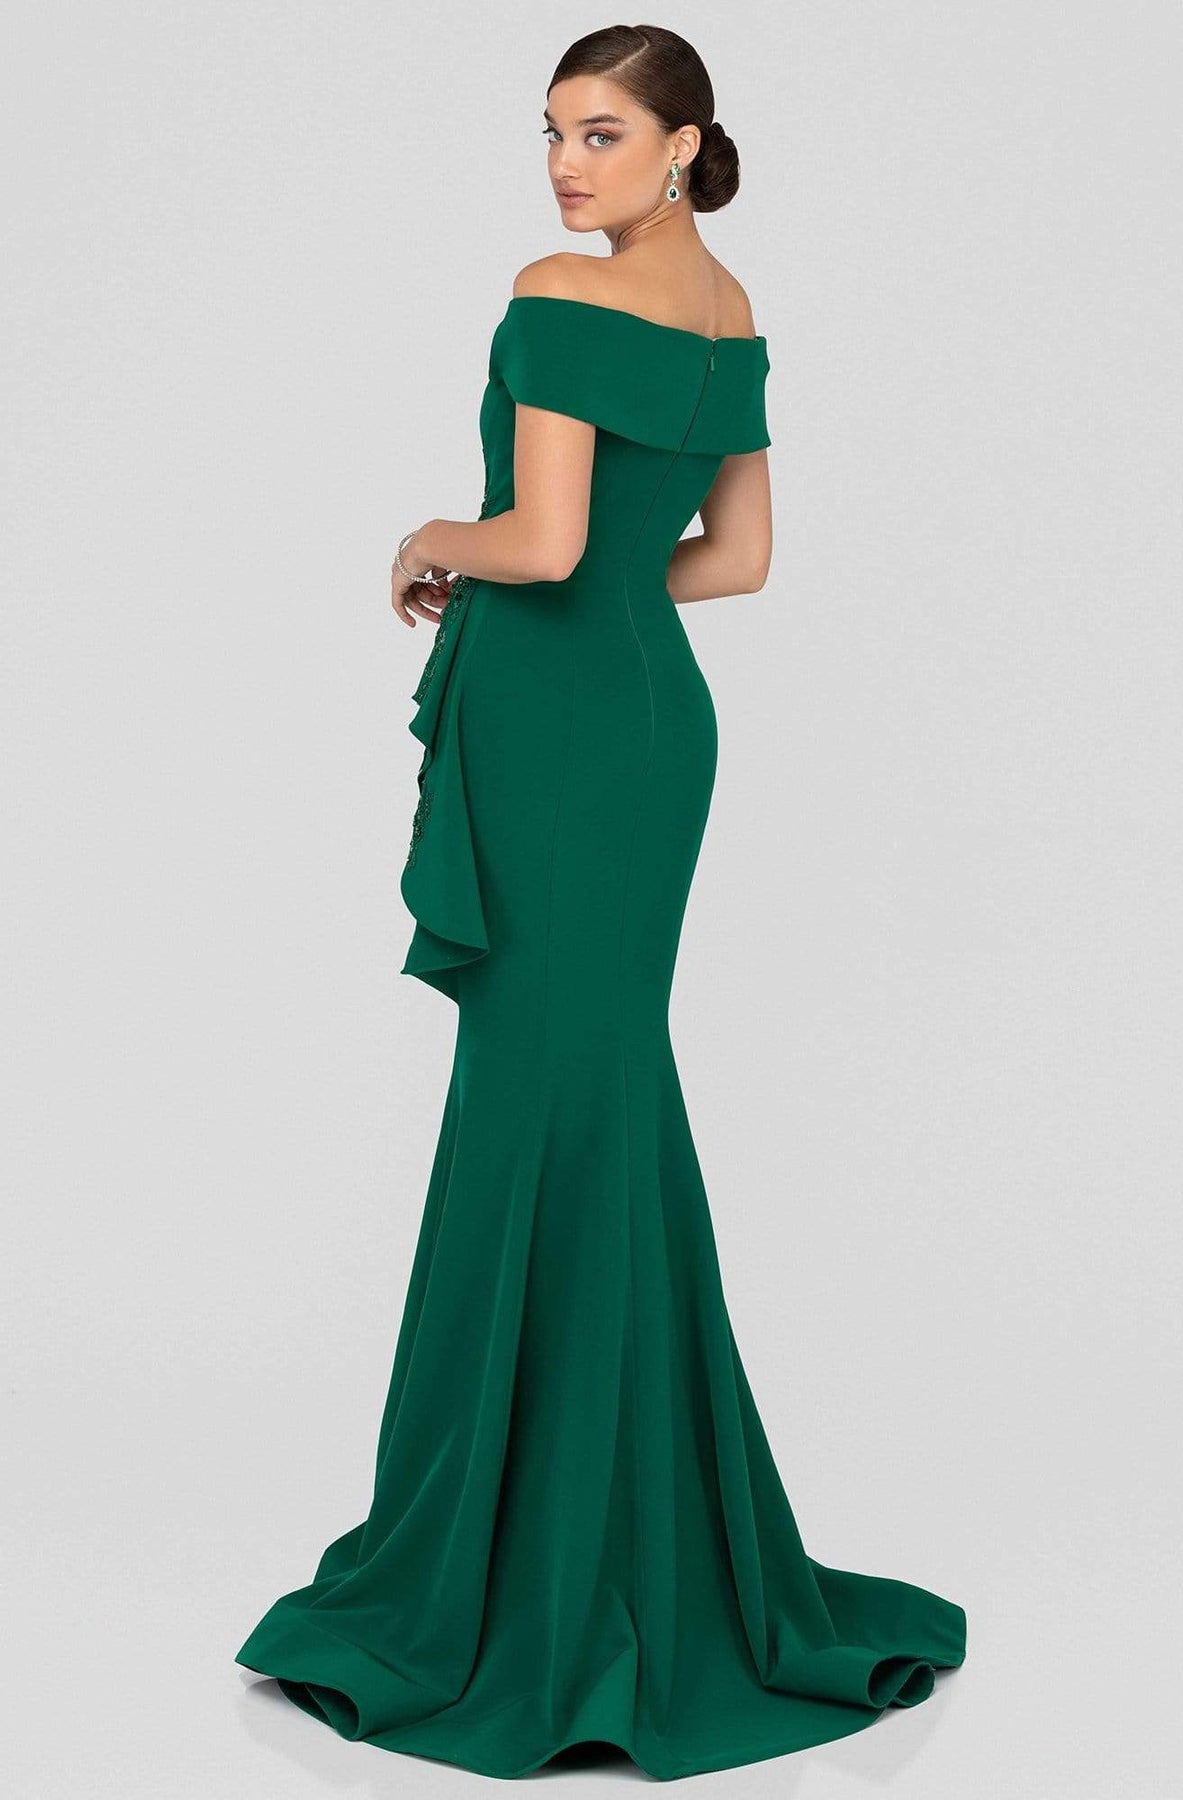 Terani Couture - 1911M9339 Off Shoulder Side Drape Peplum Mermaid Gown Special Occasion Dress